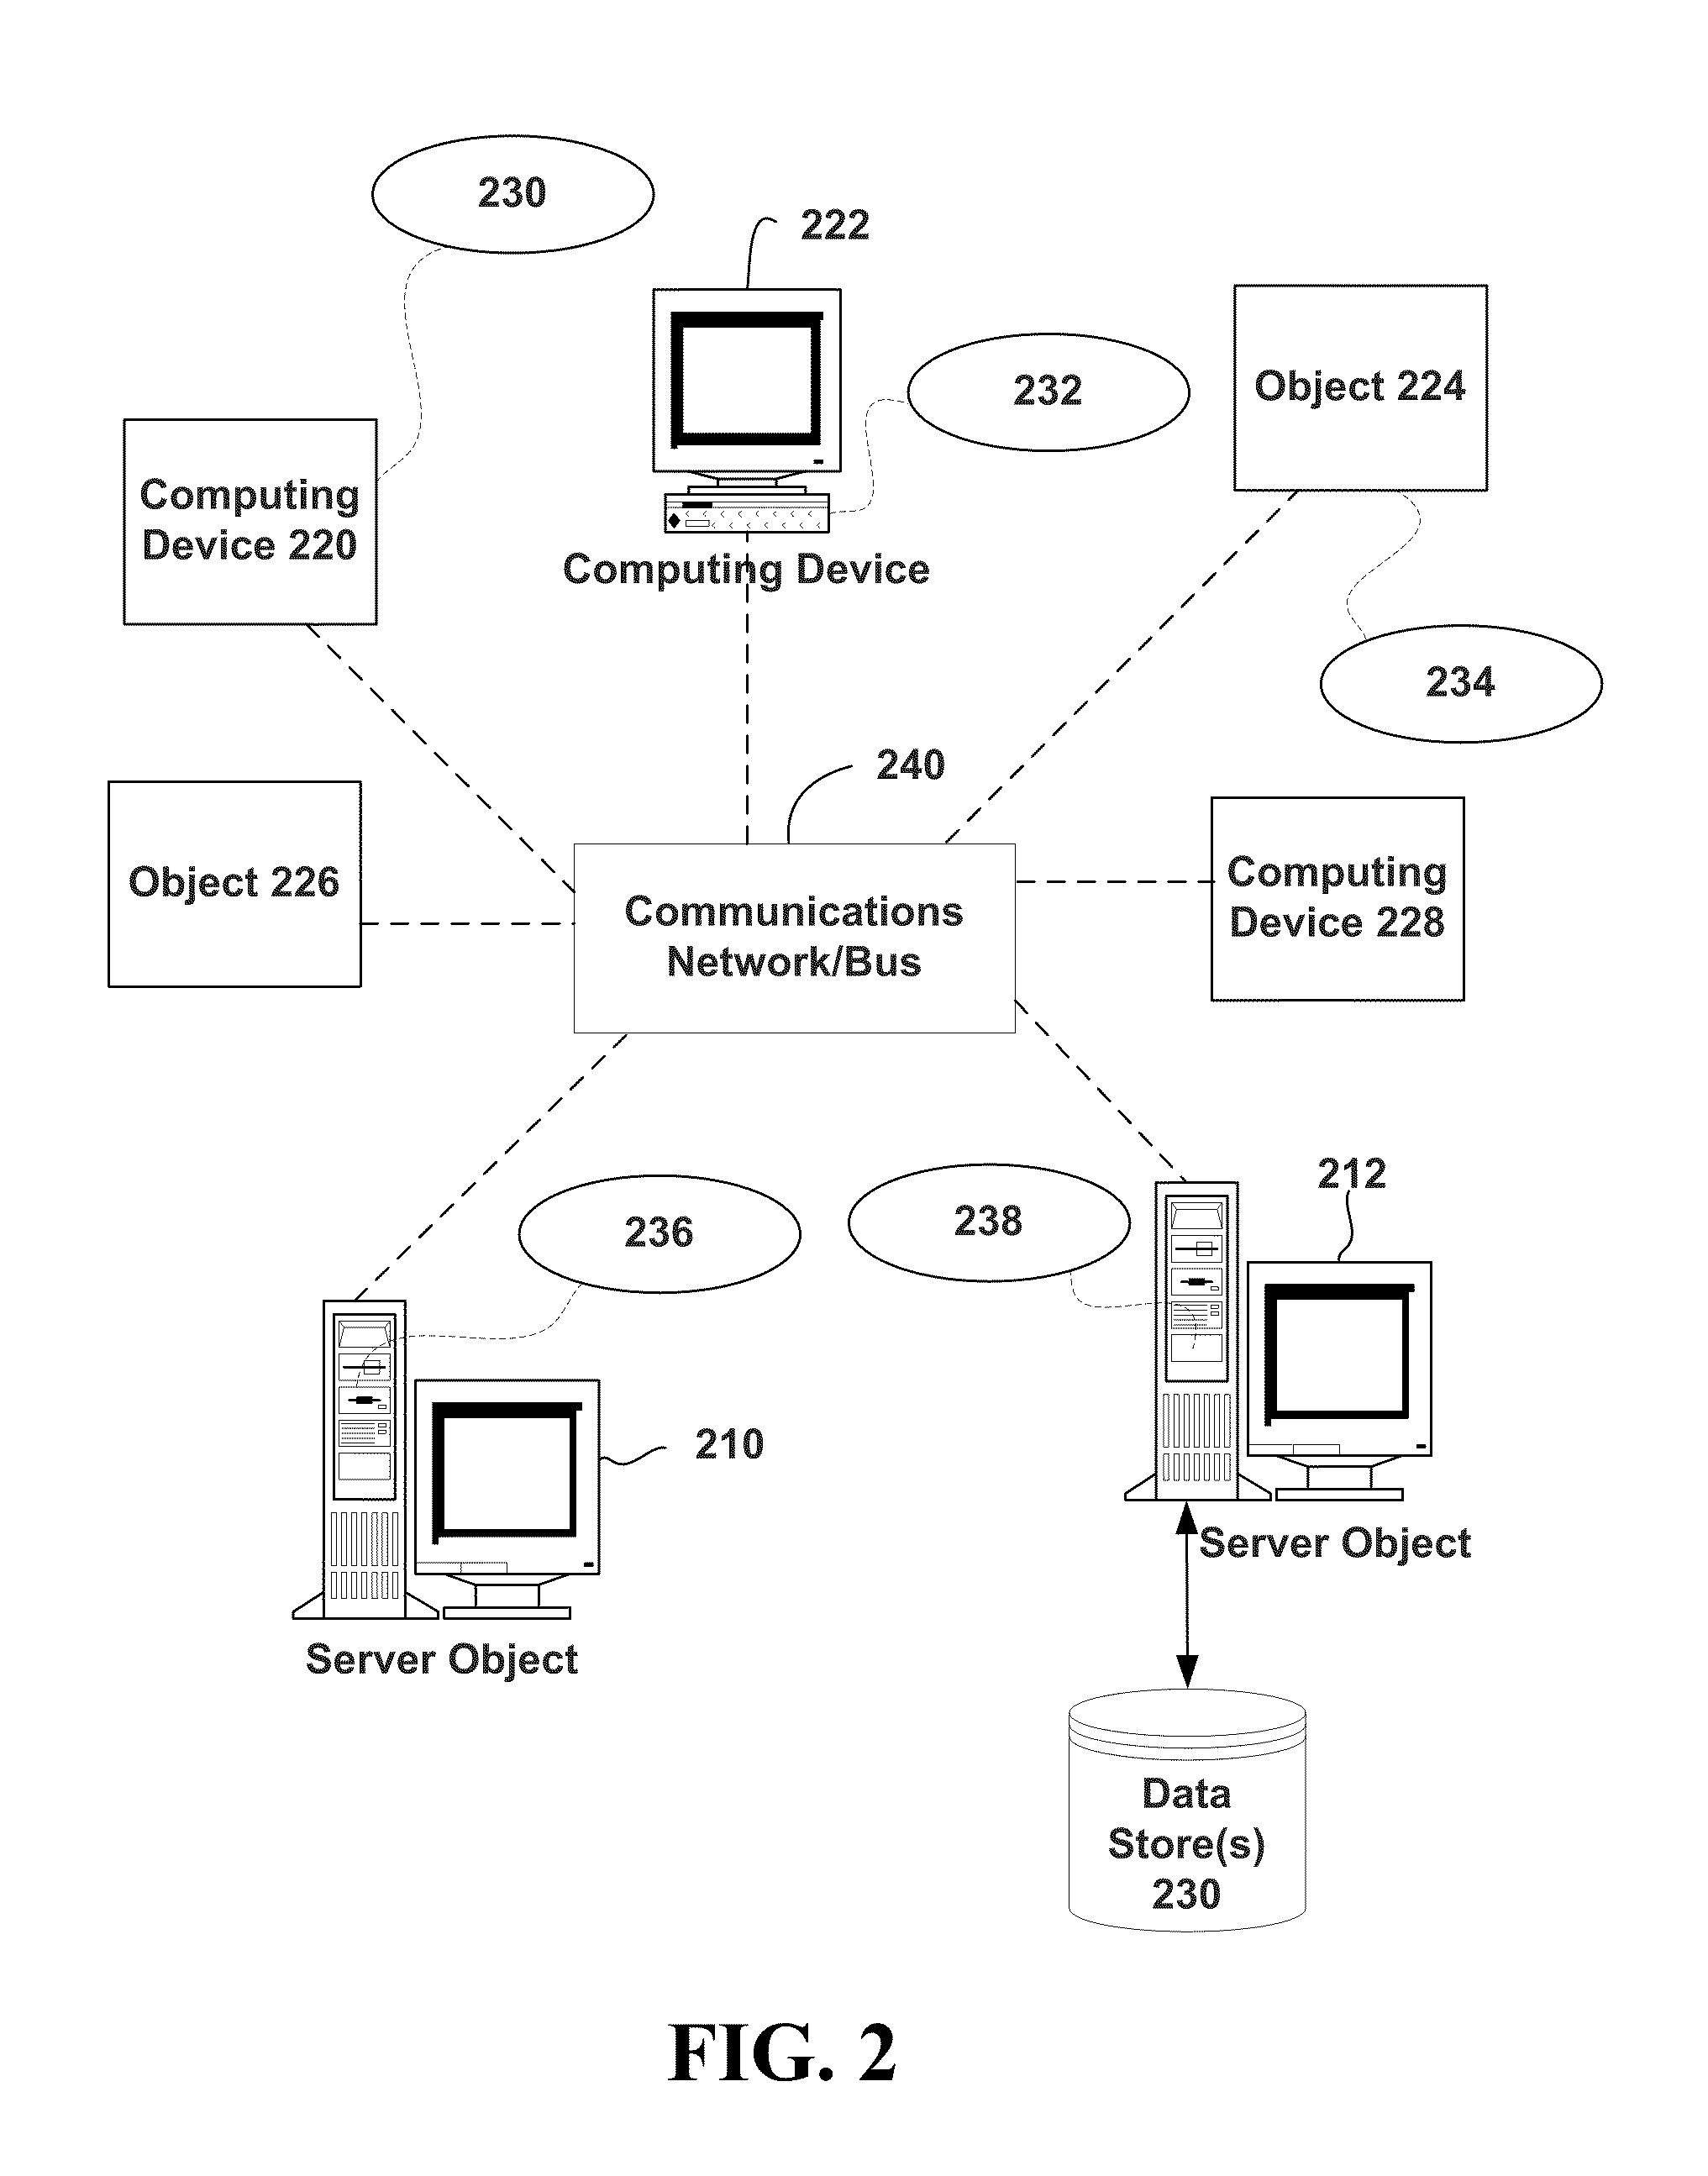 Handheld computer systems and techniques for character and command recognition related to human movements